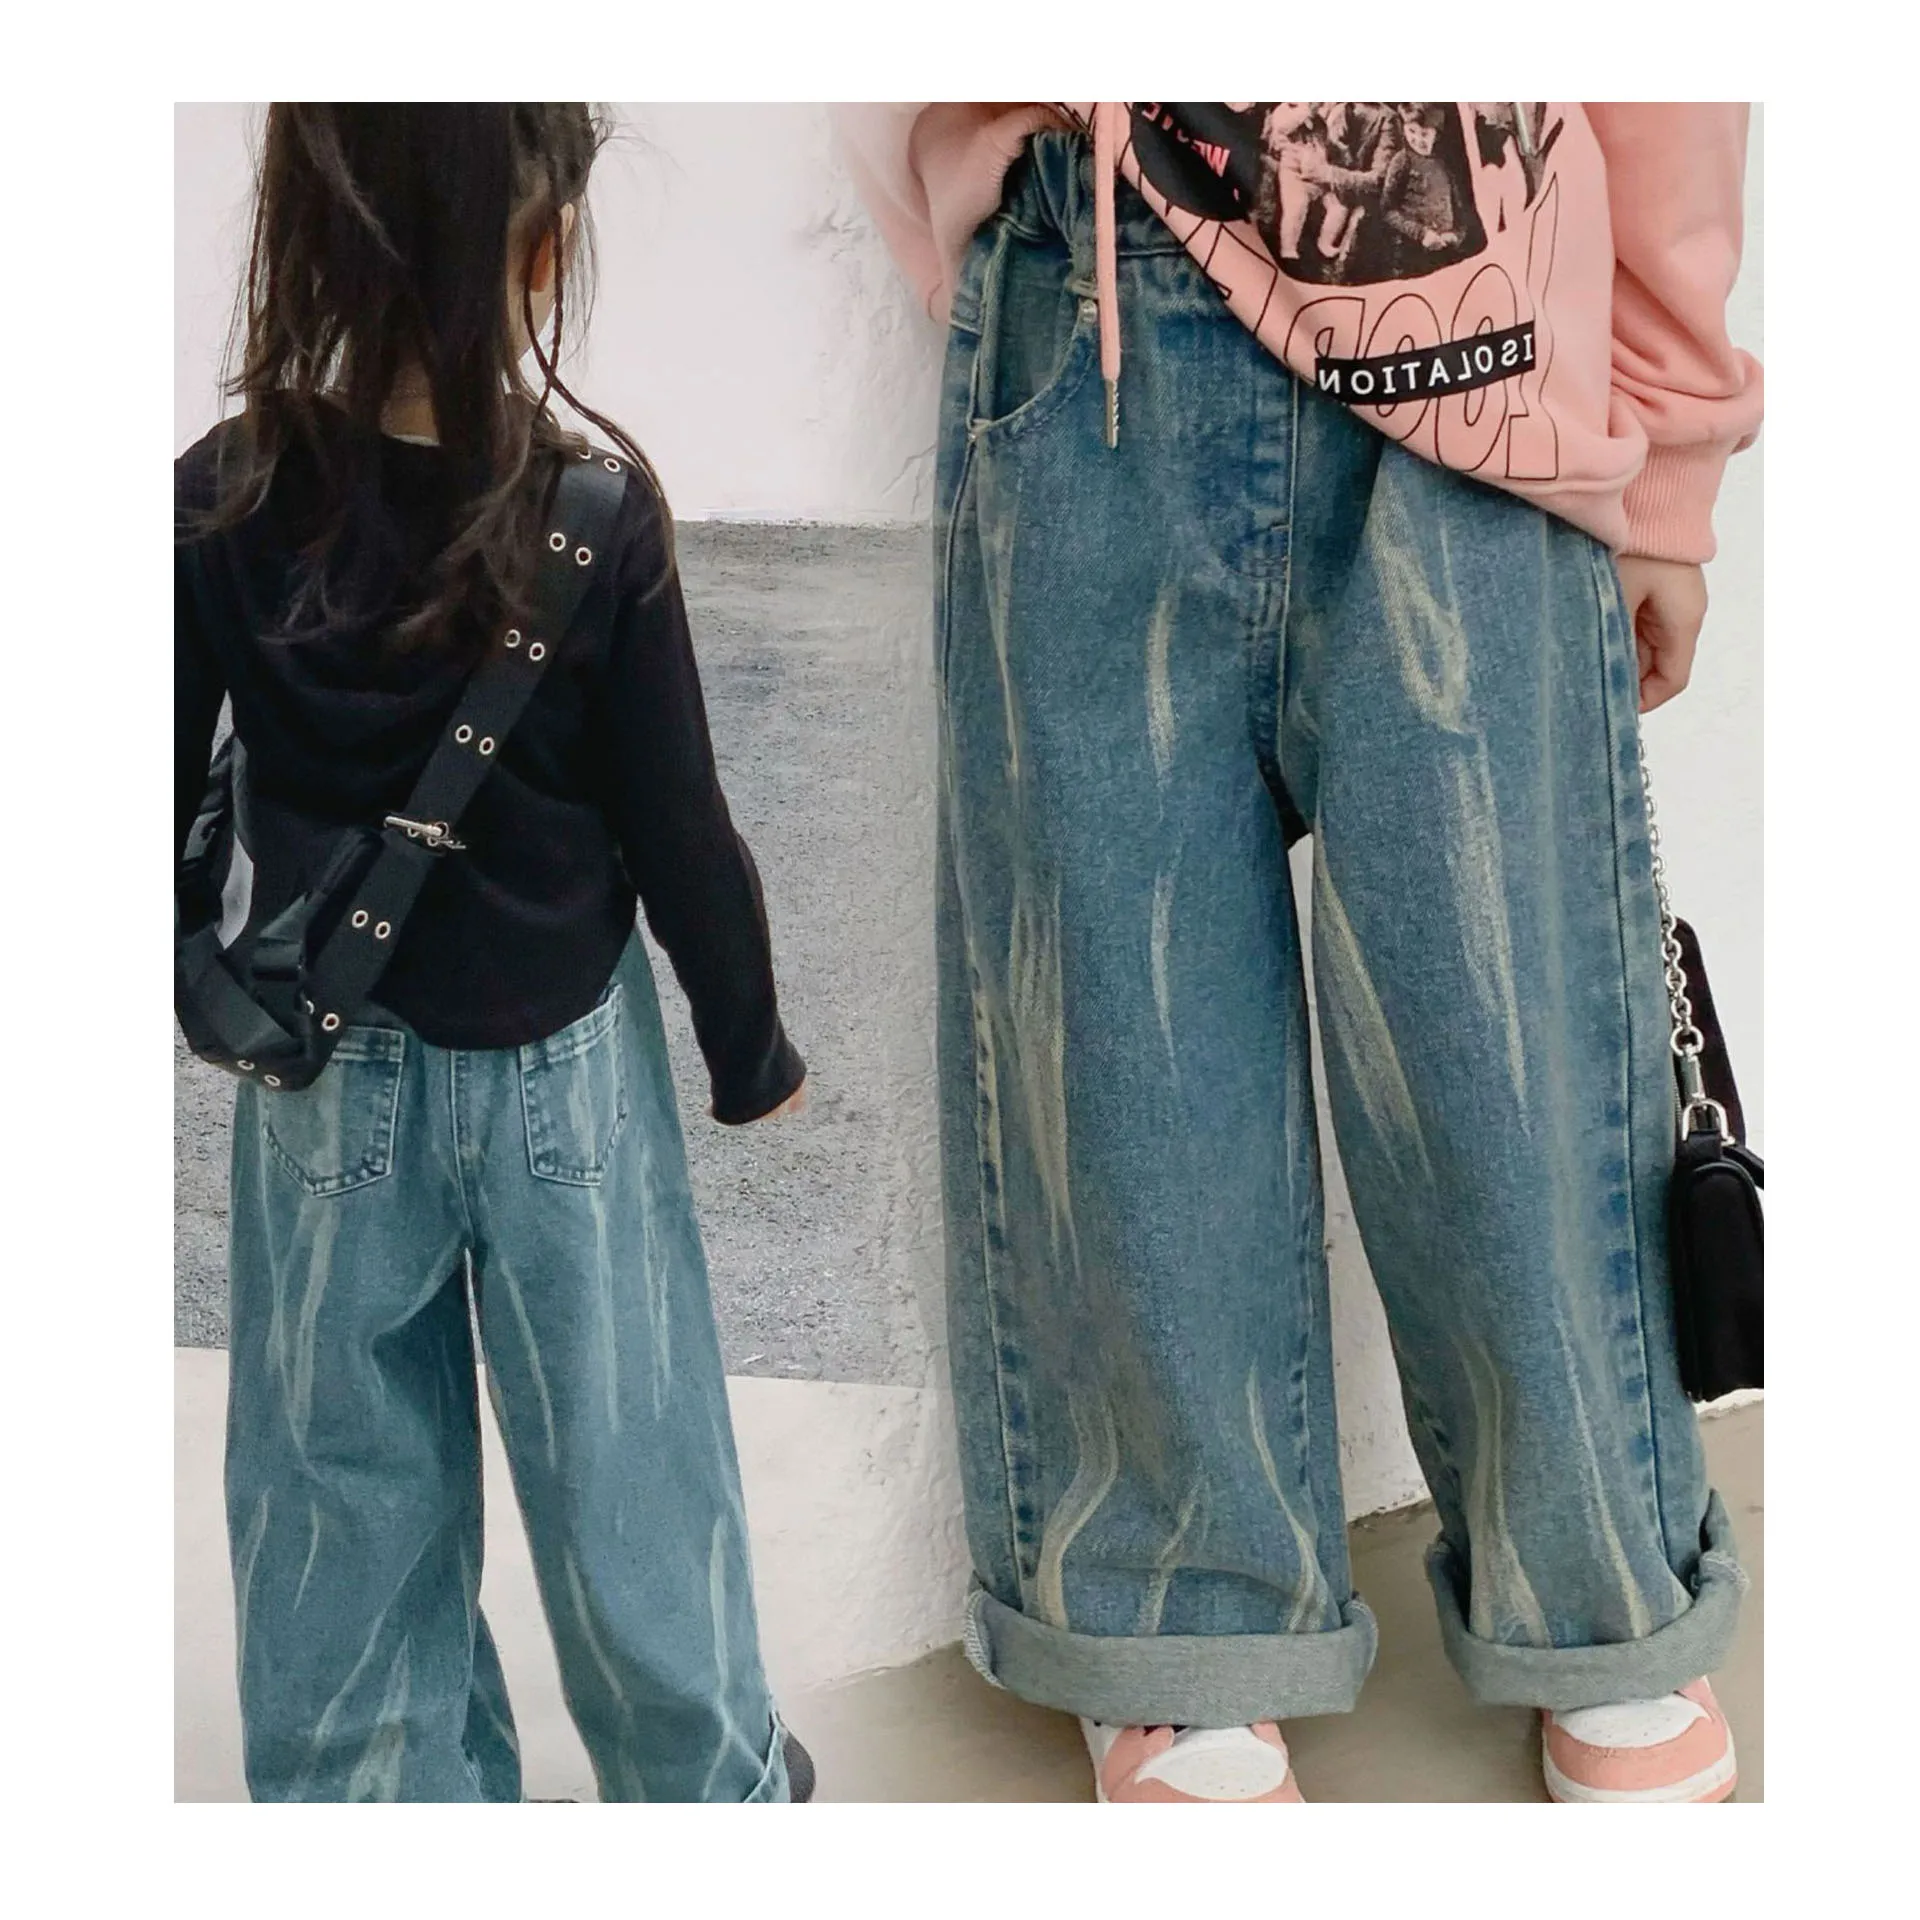 Fashion Style Autumnsummer Hip Hop Loose Pants Jeans Baggy Cargo Pants For  Women Girls Free Shipping  Pants  Capris  AliExpress